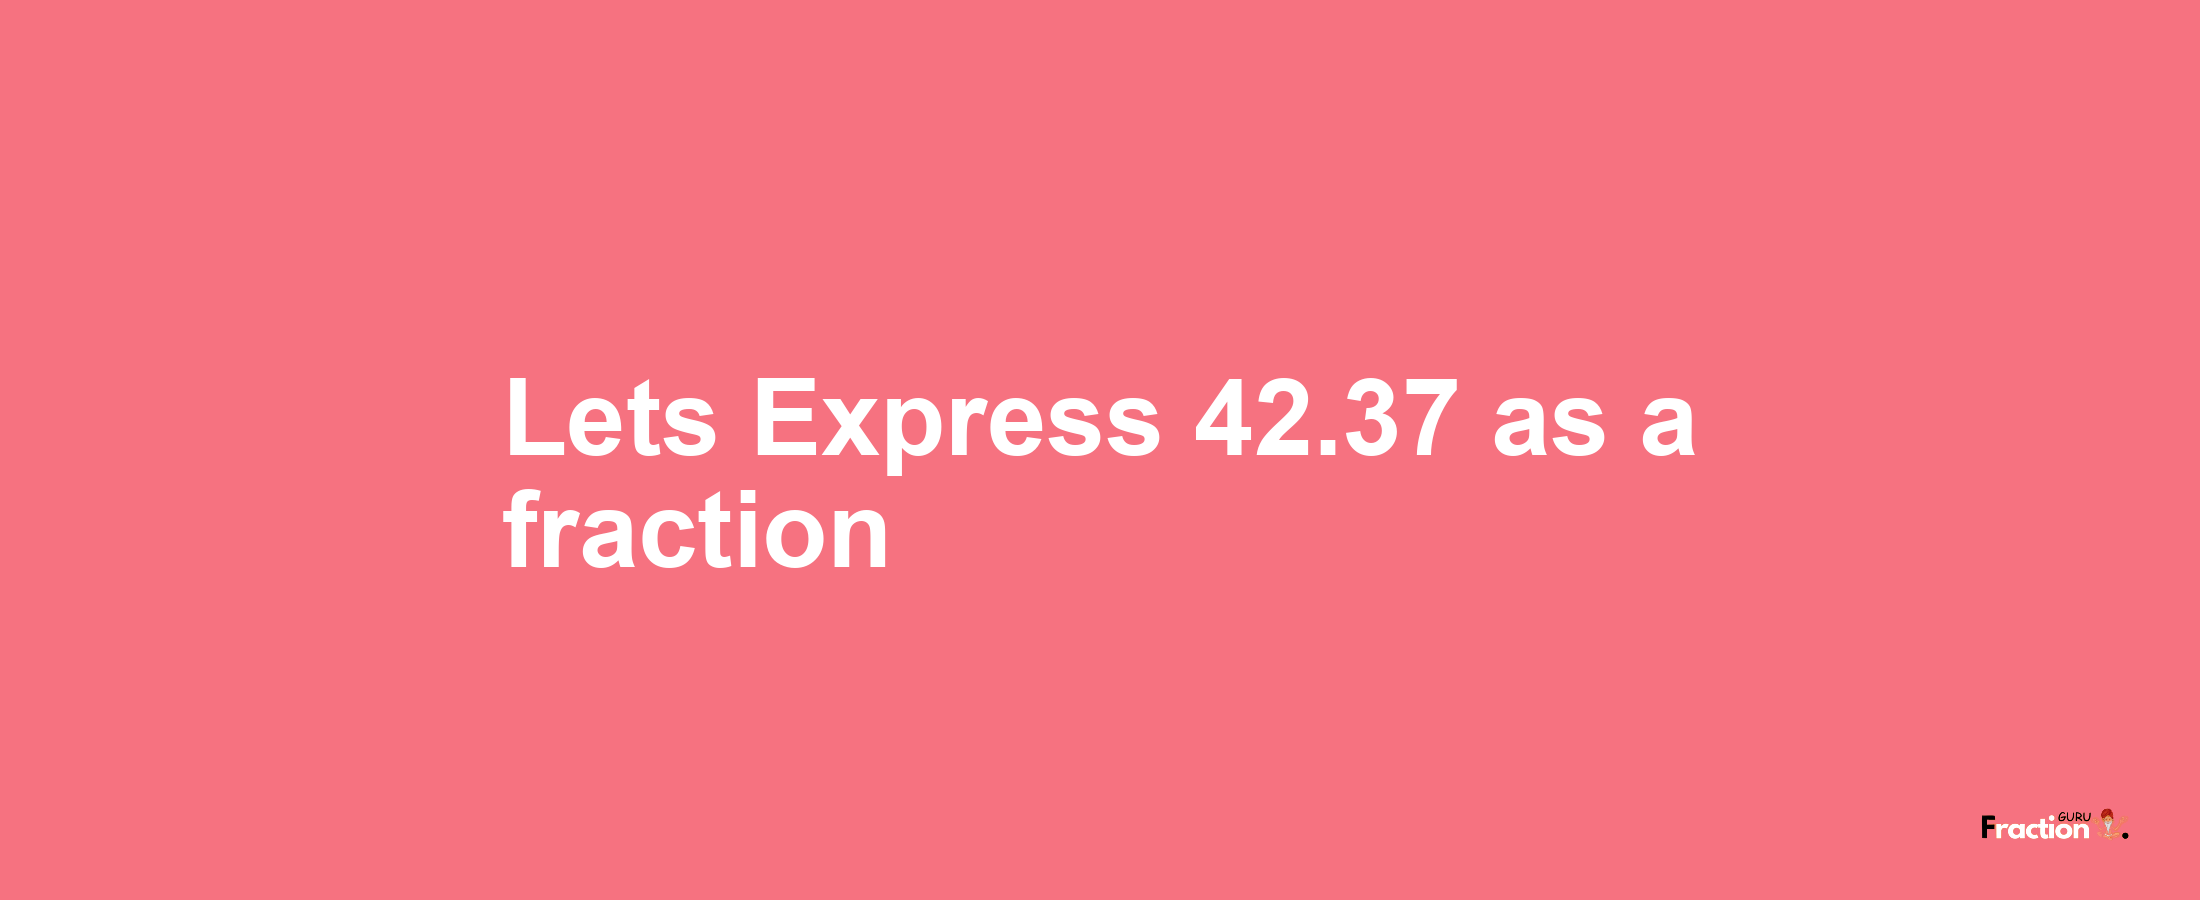 Lets Express 42.37 as afraction